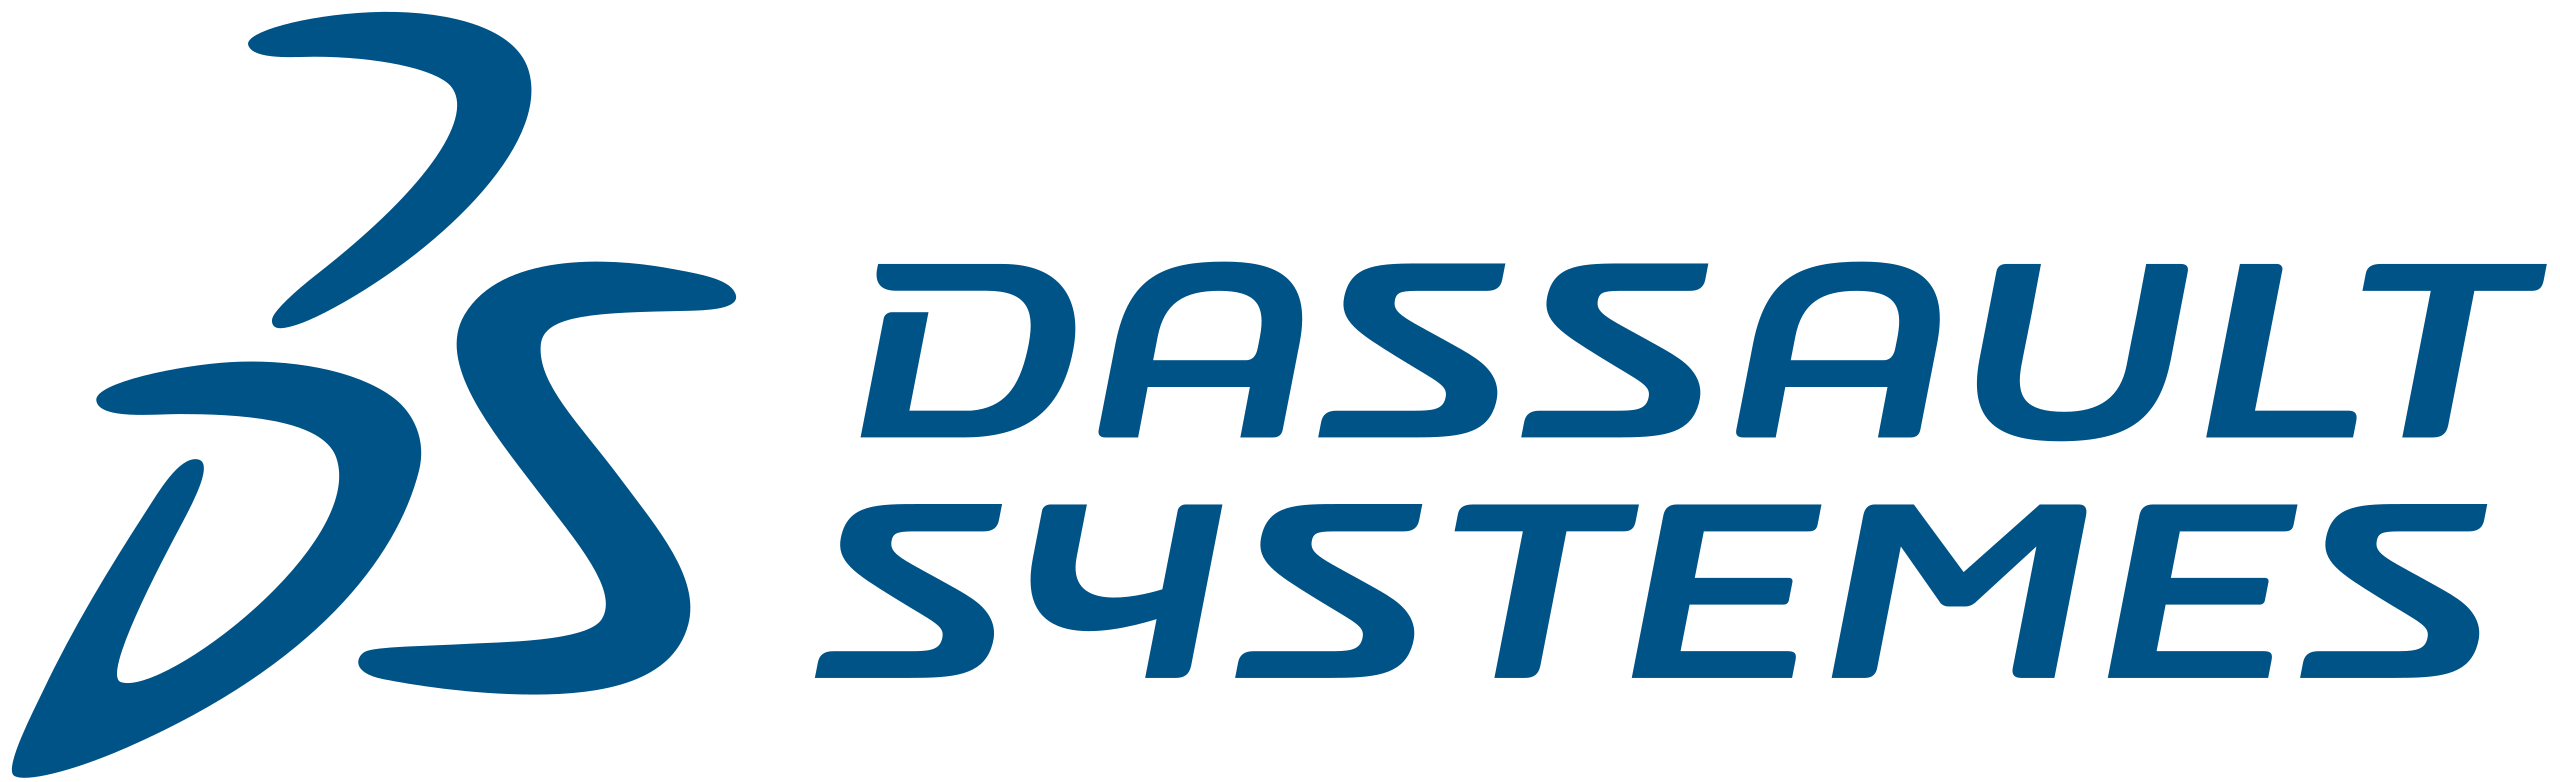 We use the Solidworks CAD program using a license provided by Dassault Systems, and also their systems engineering software.